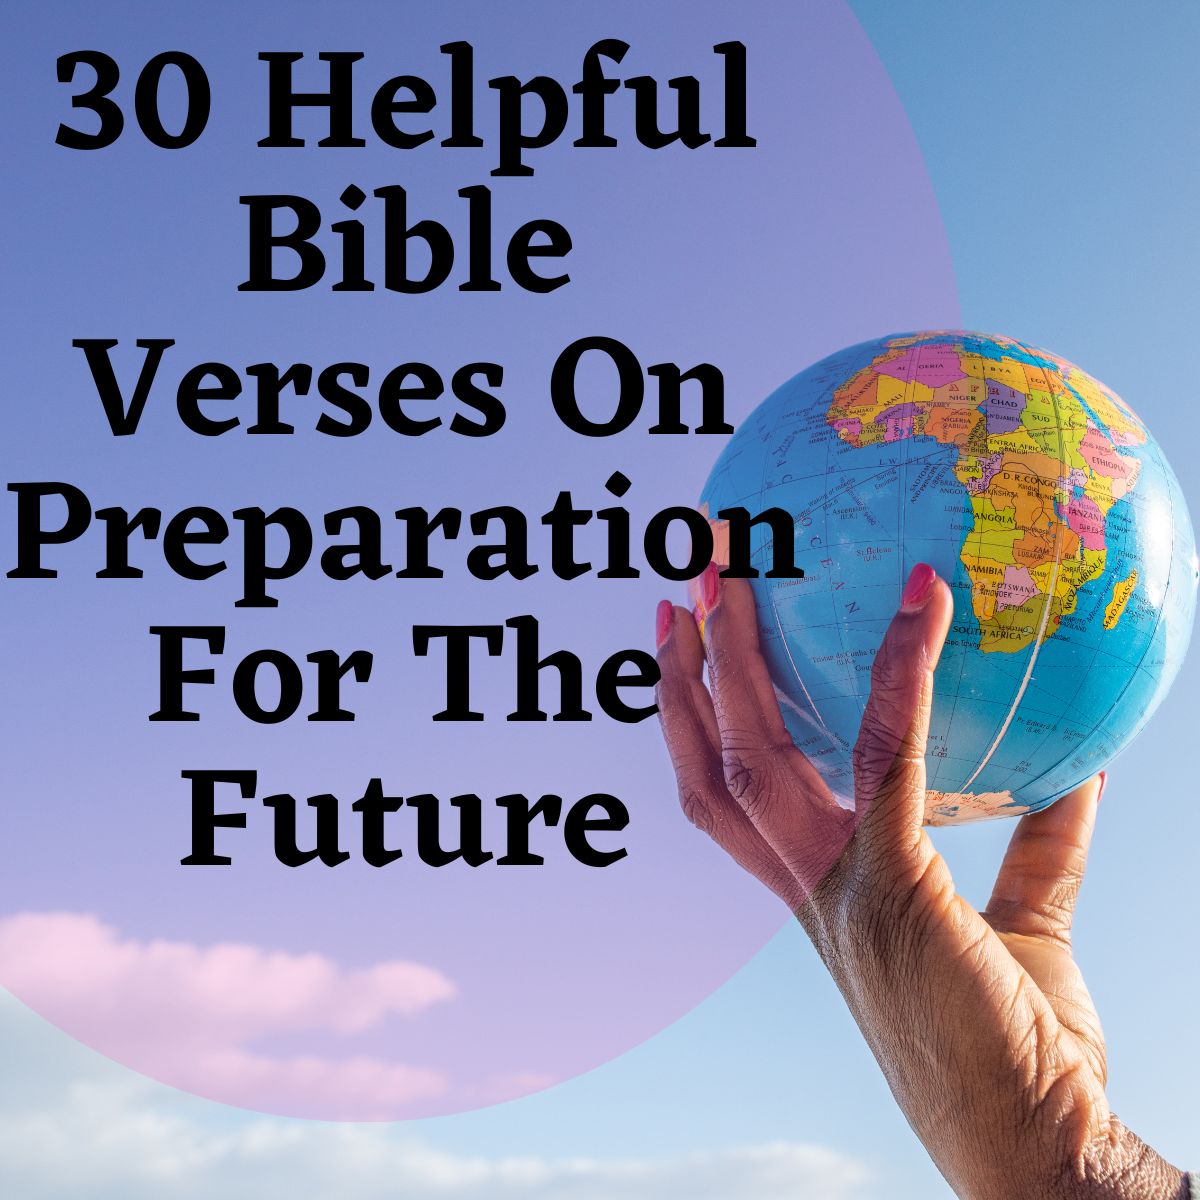 30 Helpful Bible Verses On Preparation For The Future